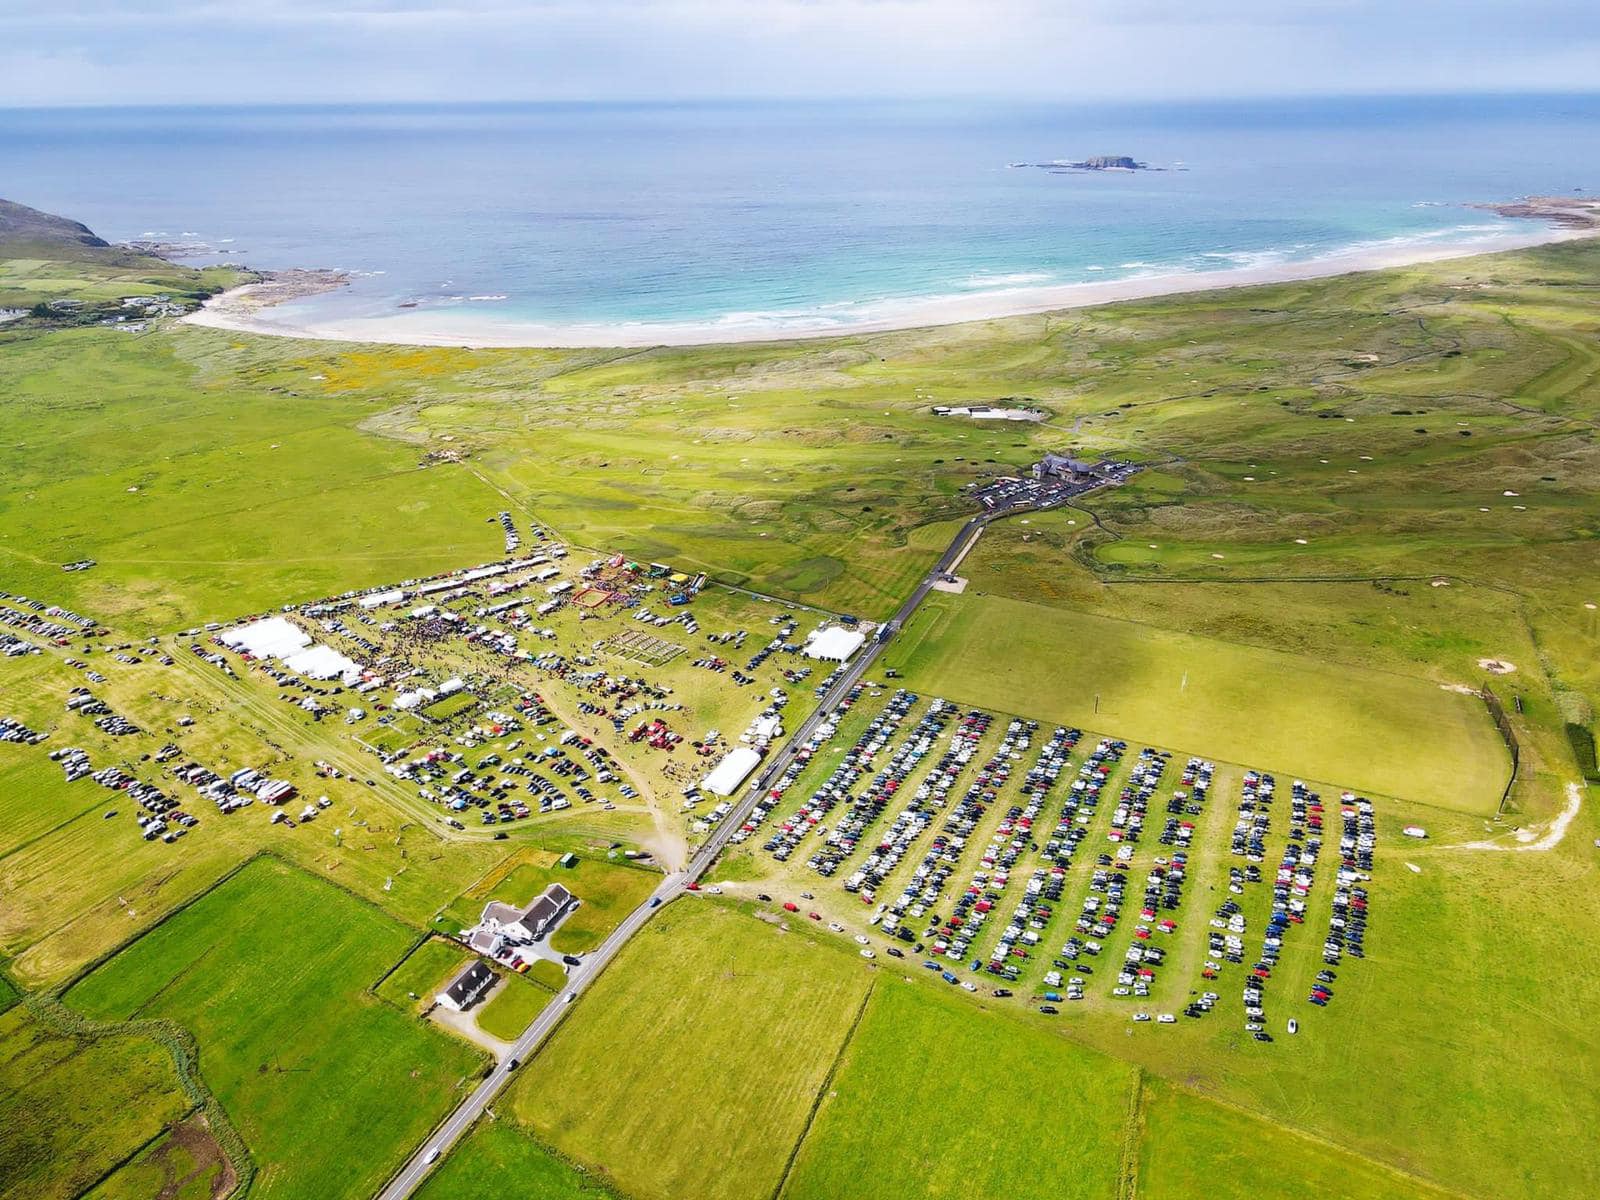 Our photography team takes advantage of the good weather to send a drone up and capture the enormity of our show against the picturesque landscape of Pollan Bay